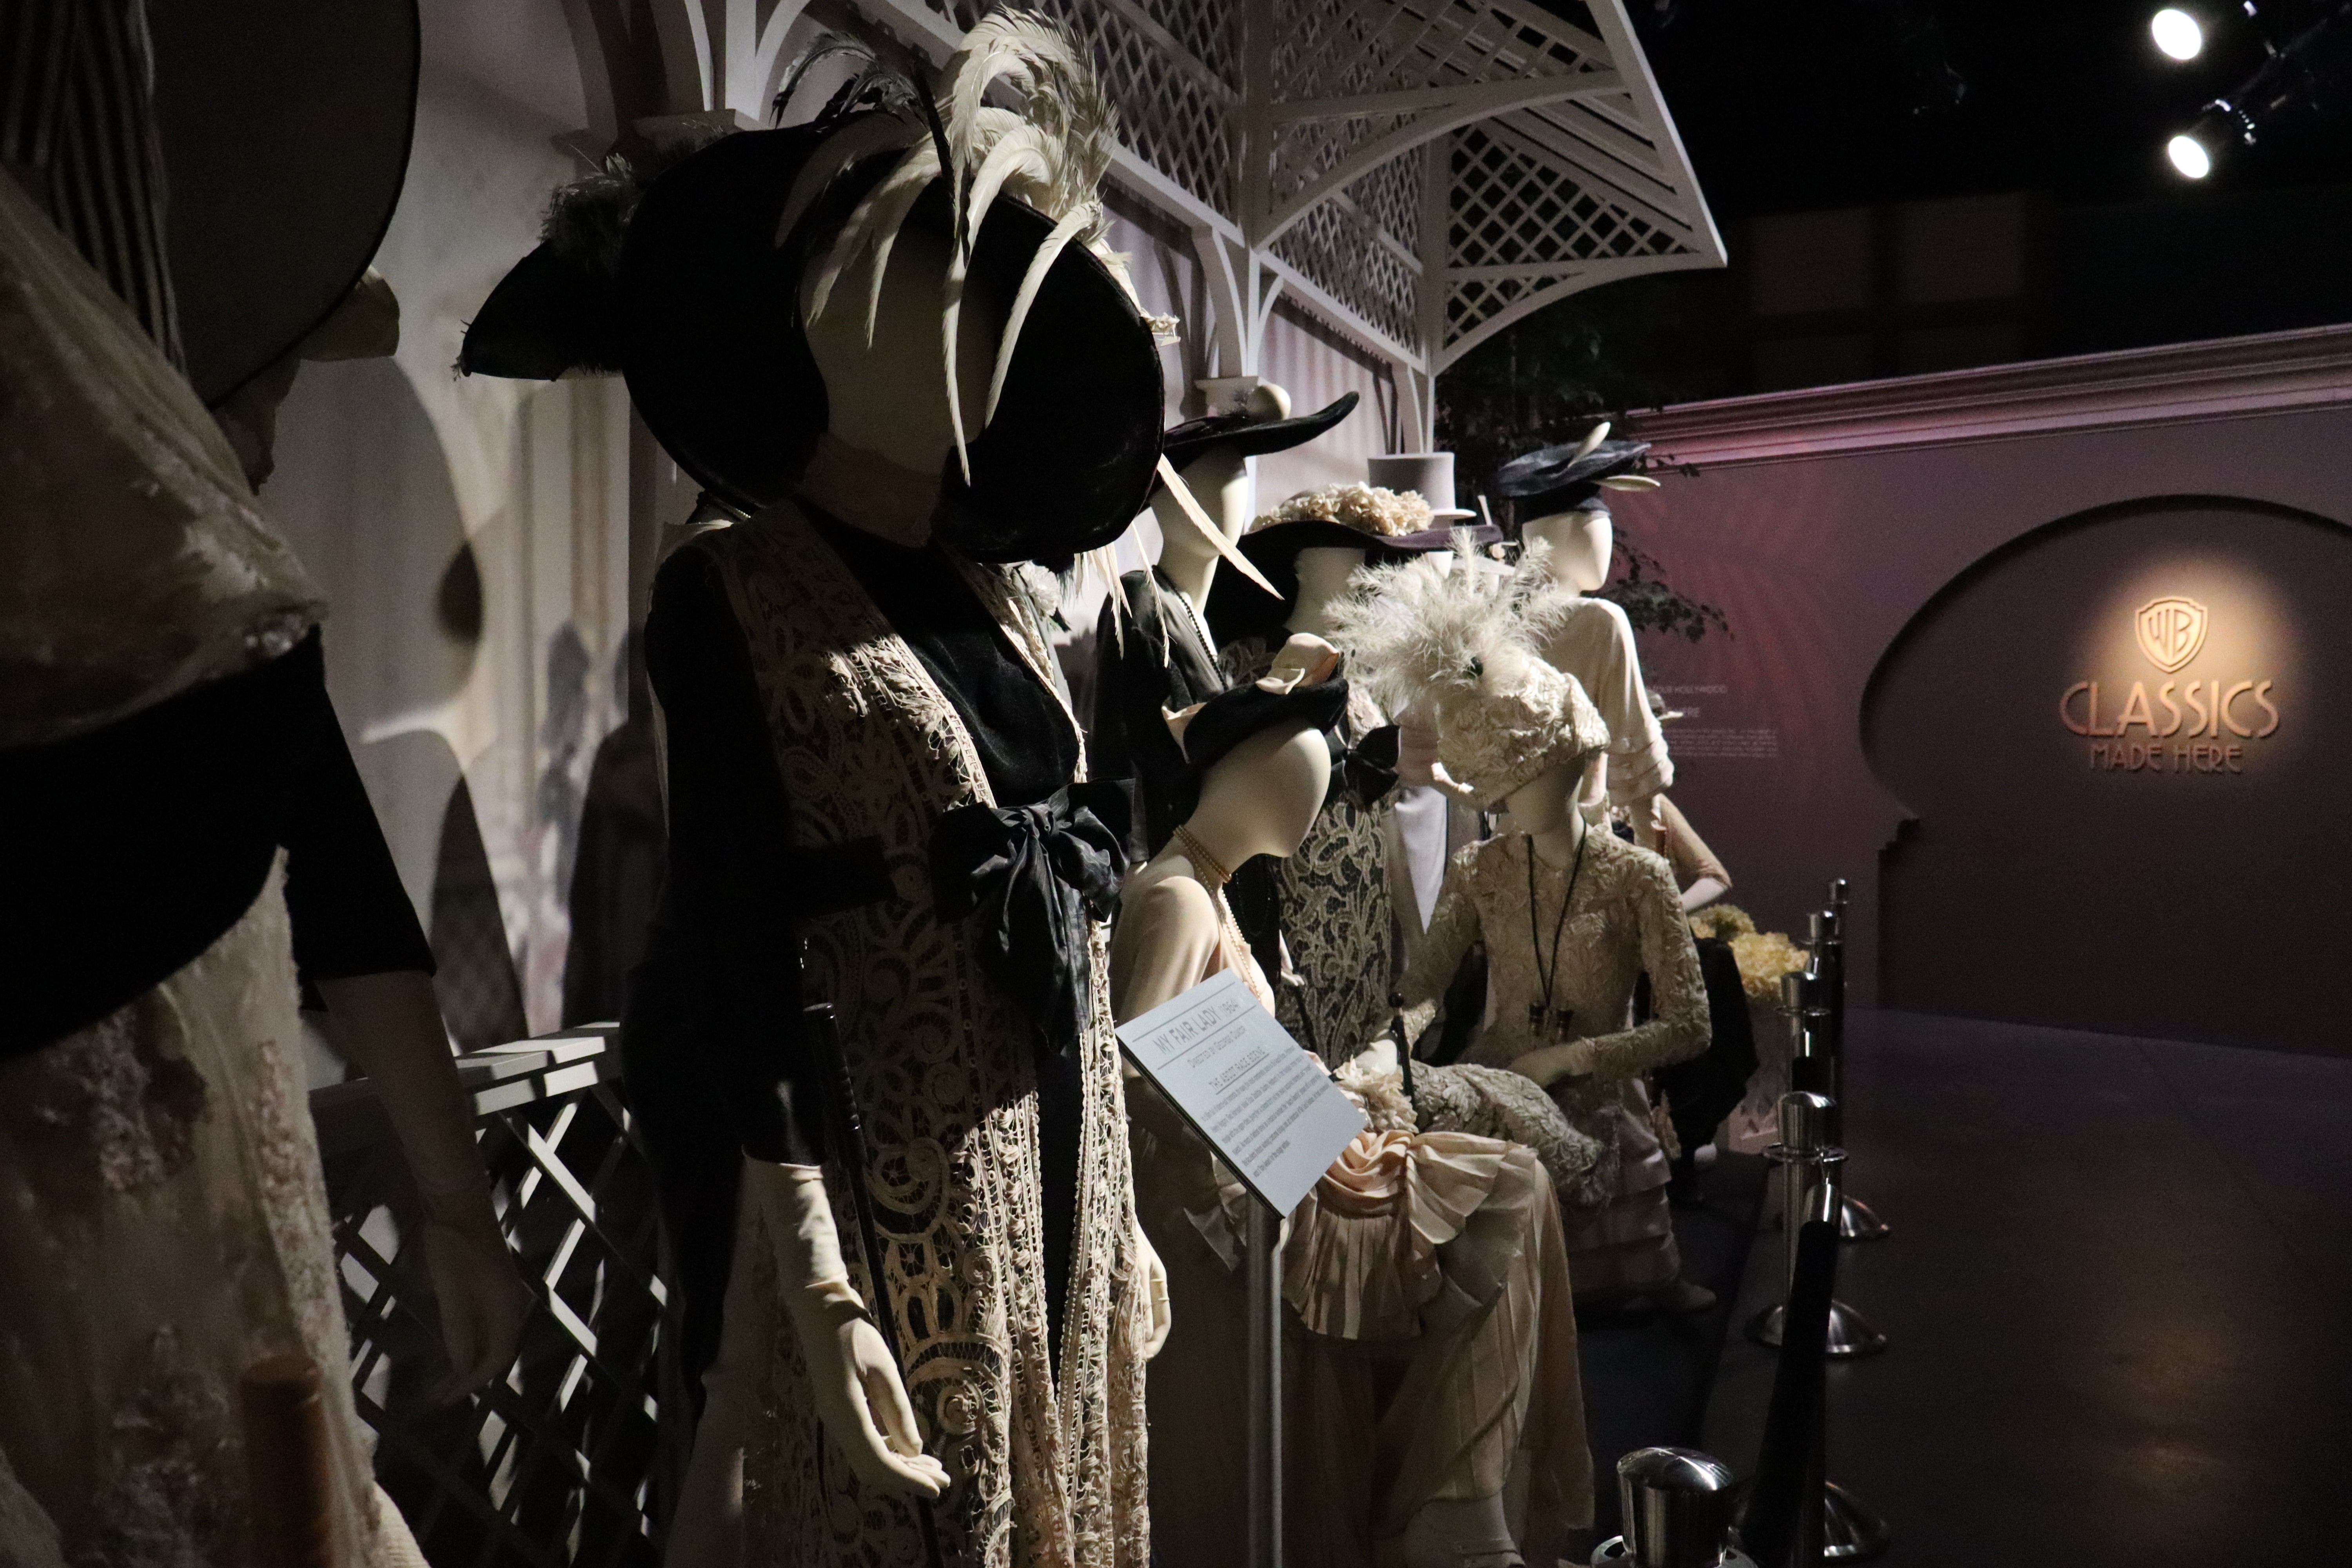 Photograph of costumes from My Fair Lady